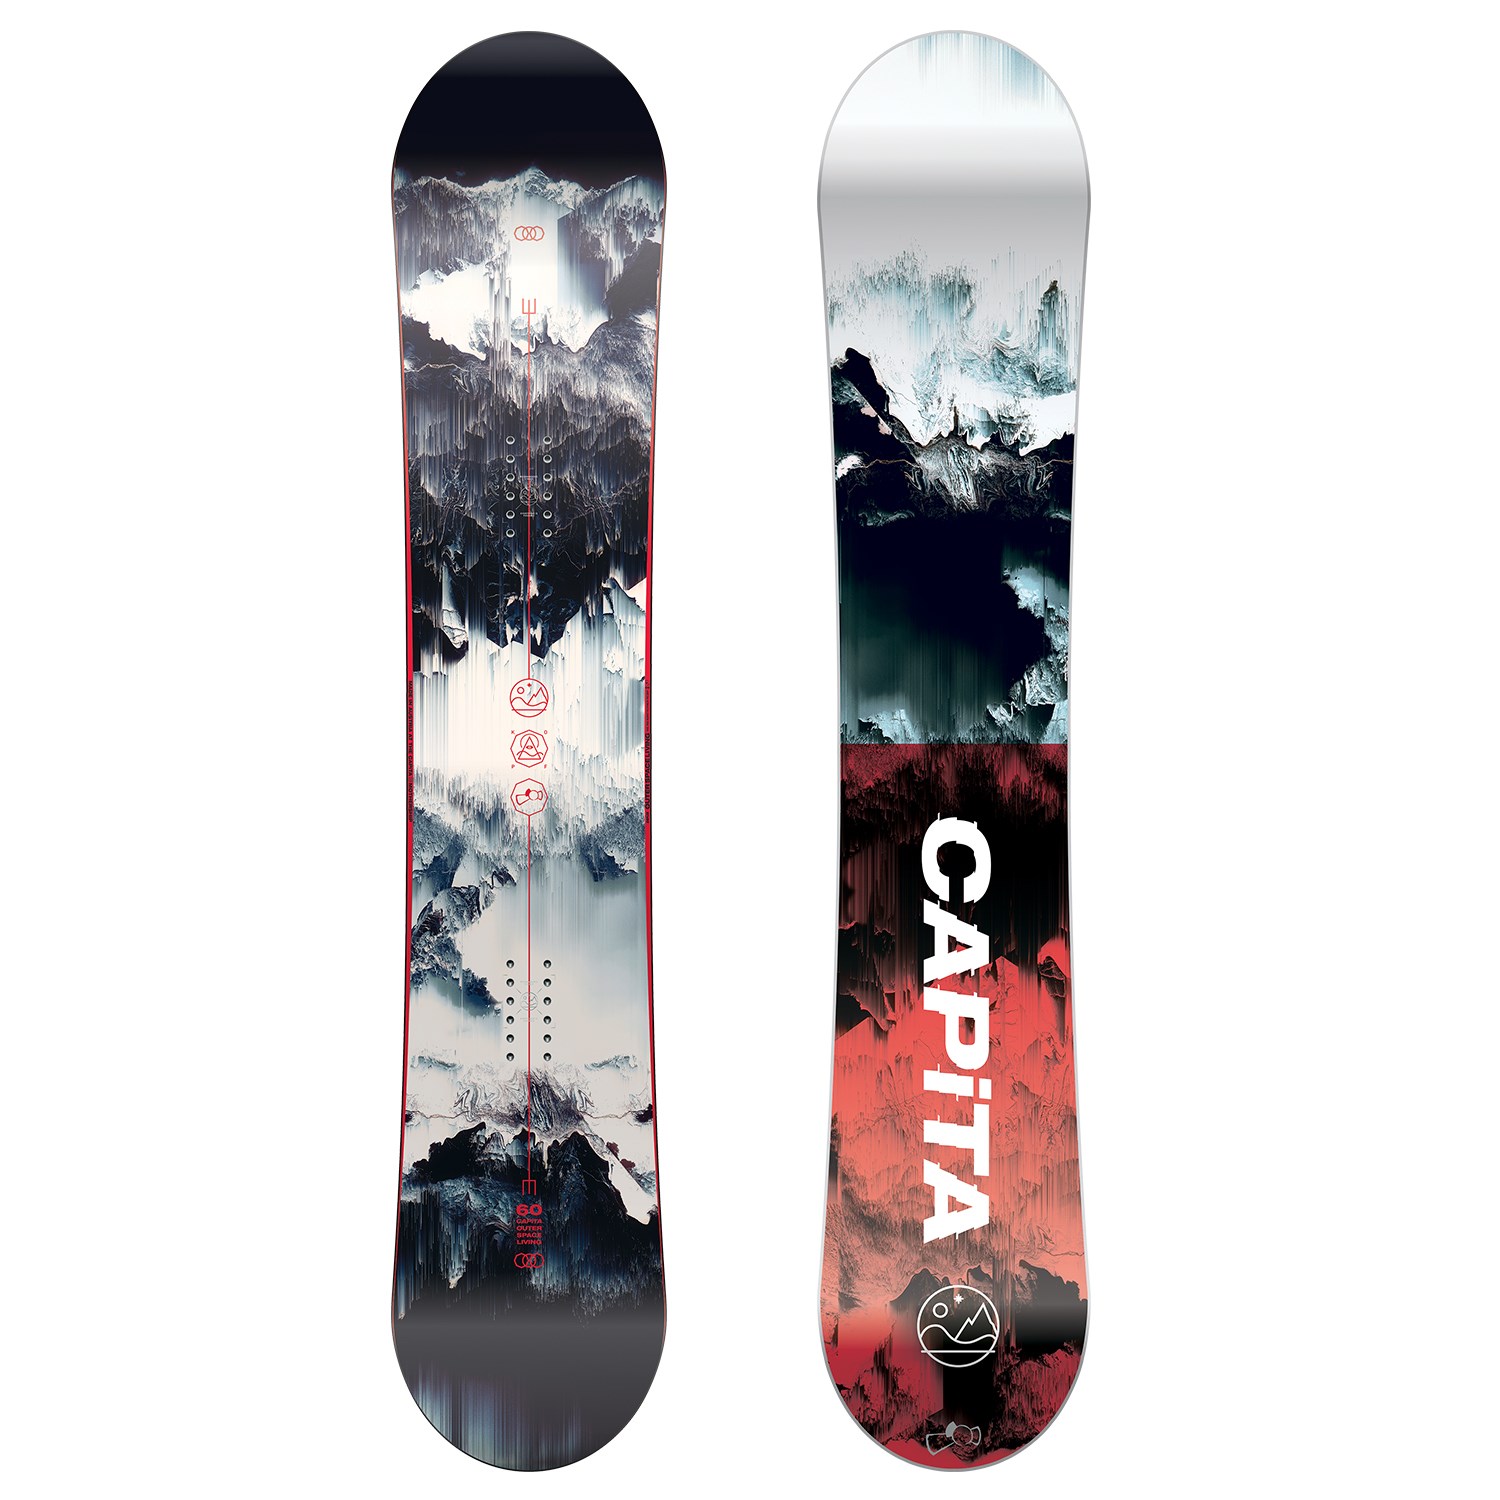 CAPiTA Outerspace Living Snowboard | evo